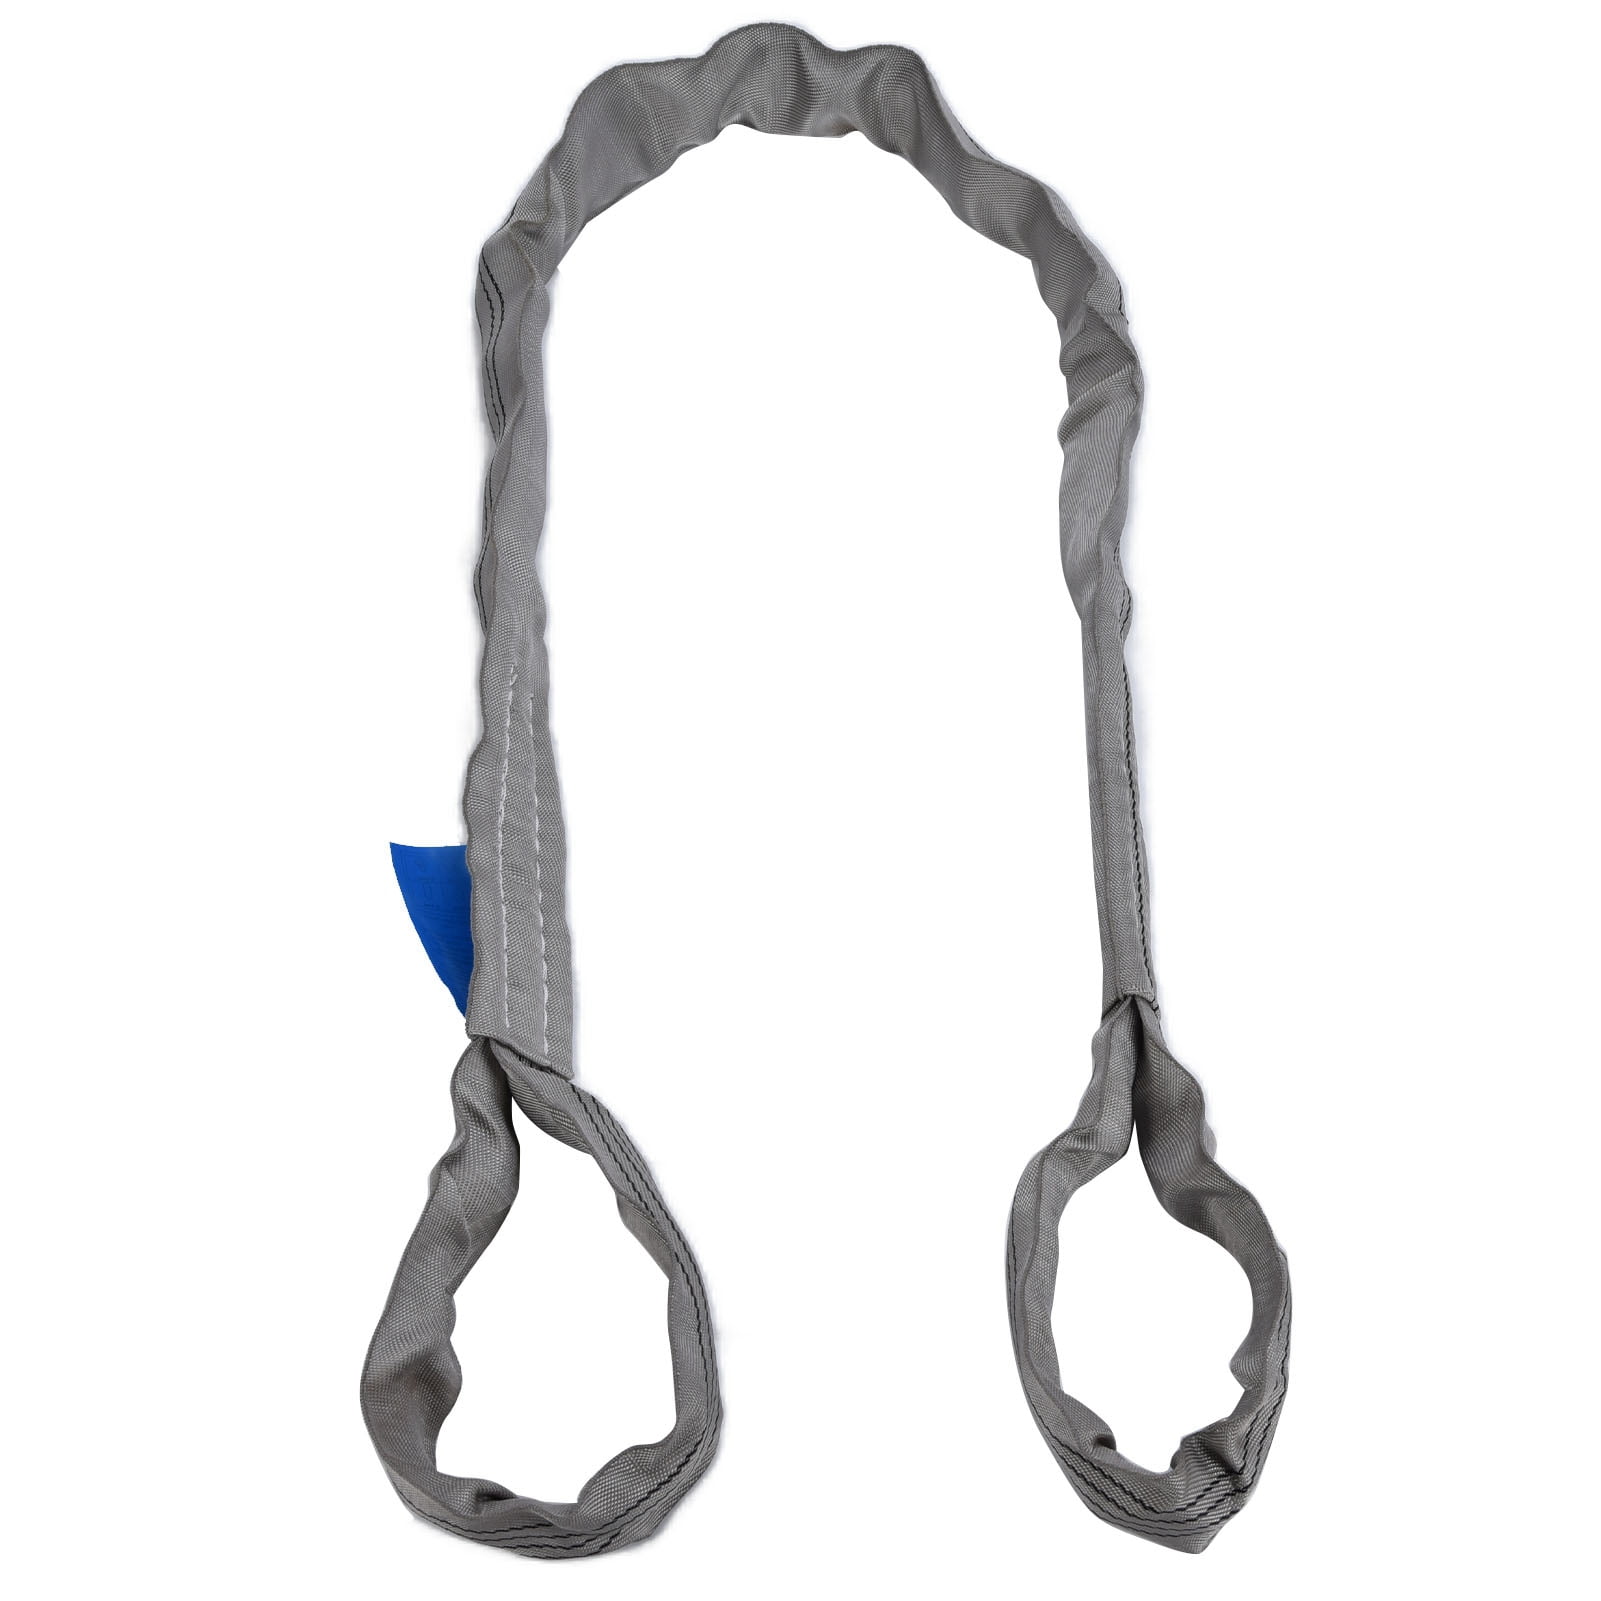 2M 6.56' 10T Polyester Endless Round Lifting Sling Crane Hoist Recovery Strap 